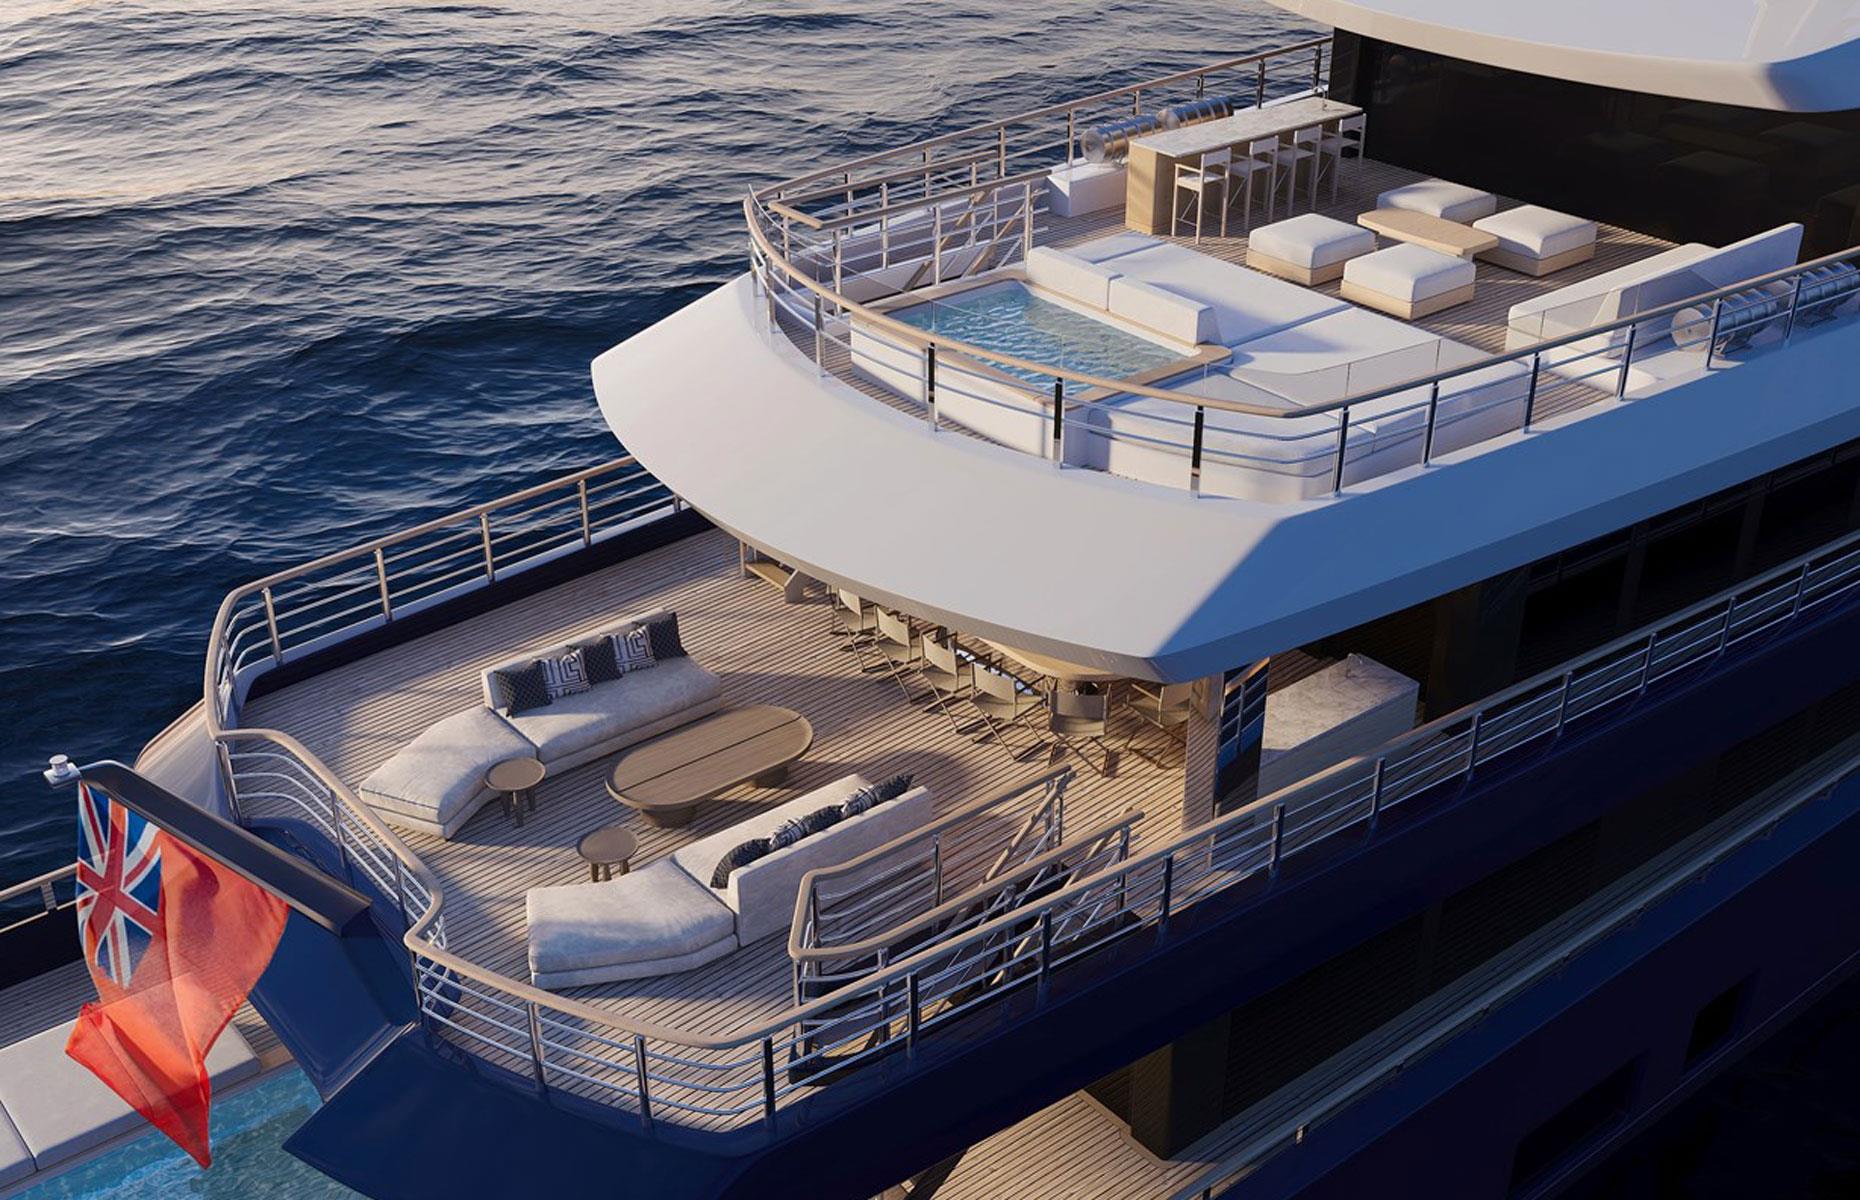 <p>The turnkey superyacht, which is getting its finishing touches at the Feadship Royal Van Lent shipyard in the Netherlands, has a slick two-tone exterior by Feadship's De Voogt Naval Architects. Its chic interiors are courtesy of Parisian design house Gilles & Boissier.</p>  <p><em>Project 825</em> has six staterooms with space for 12 guests, who'll have their every whim catered to by 17 crew members. Among its key selling points are an awesome glass-bottomed swimming pool and a private VIP terrace that boasts its own Jacuzzi.</p>  <p>There's also a sauna, deck gym, games room, and touch-and-go helipad, as well as an elevator. </p>